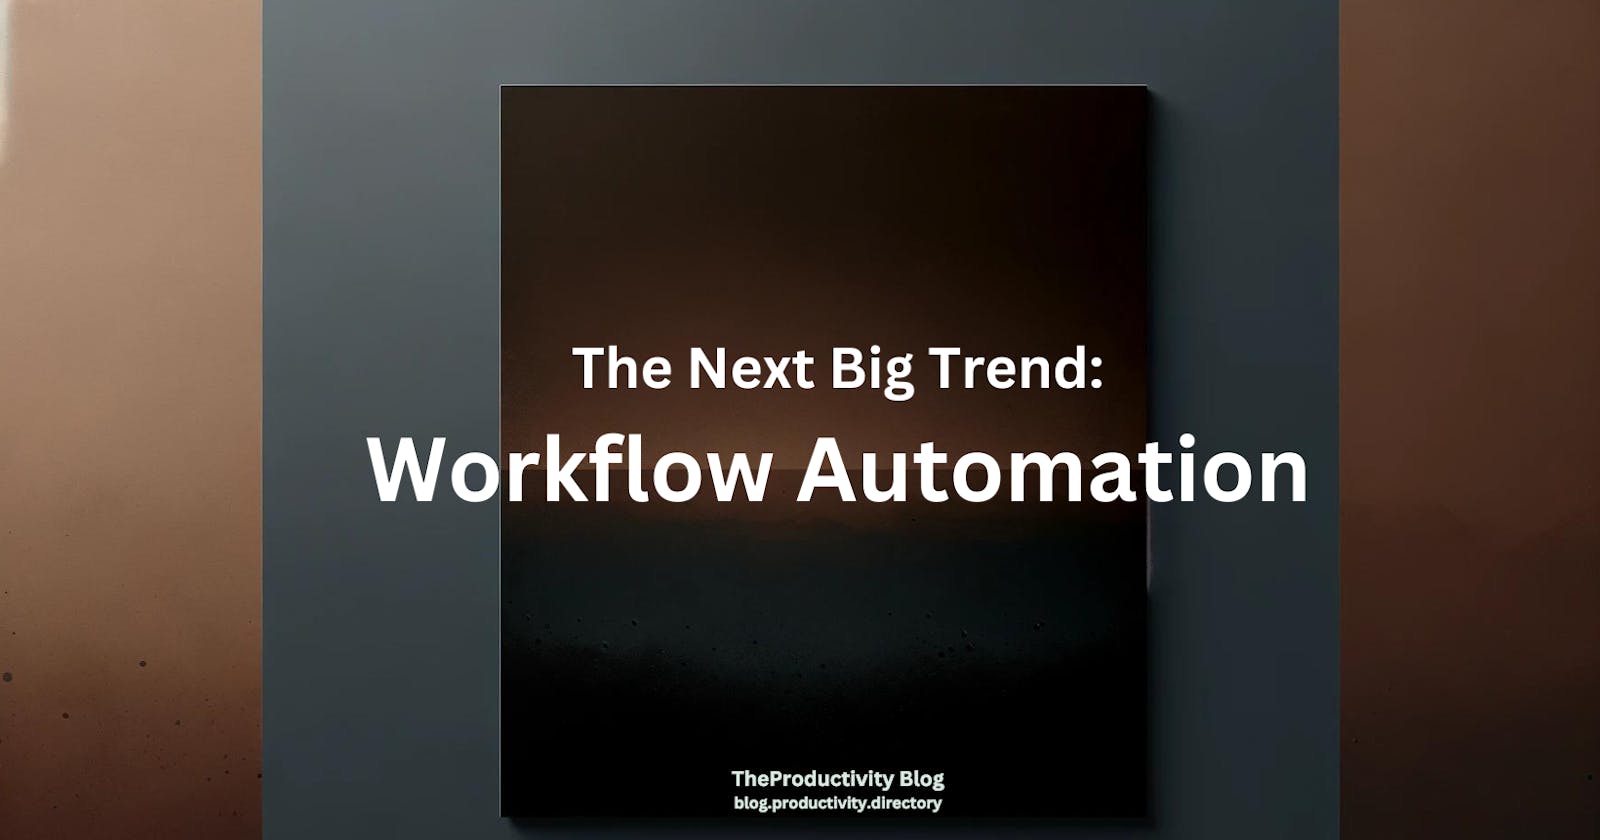 Is Workflow Automation The Next Big Trend?